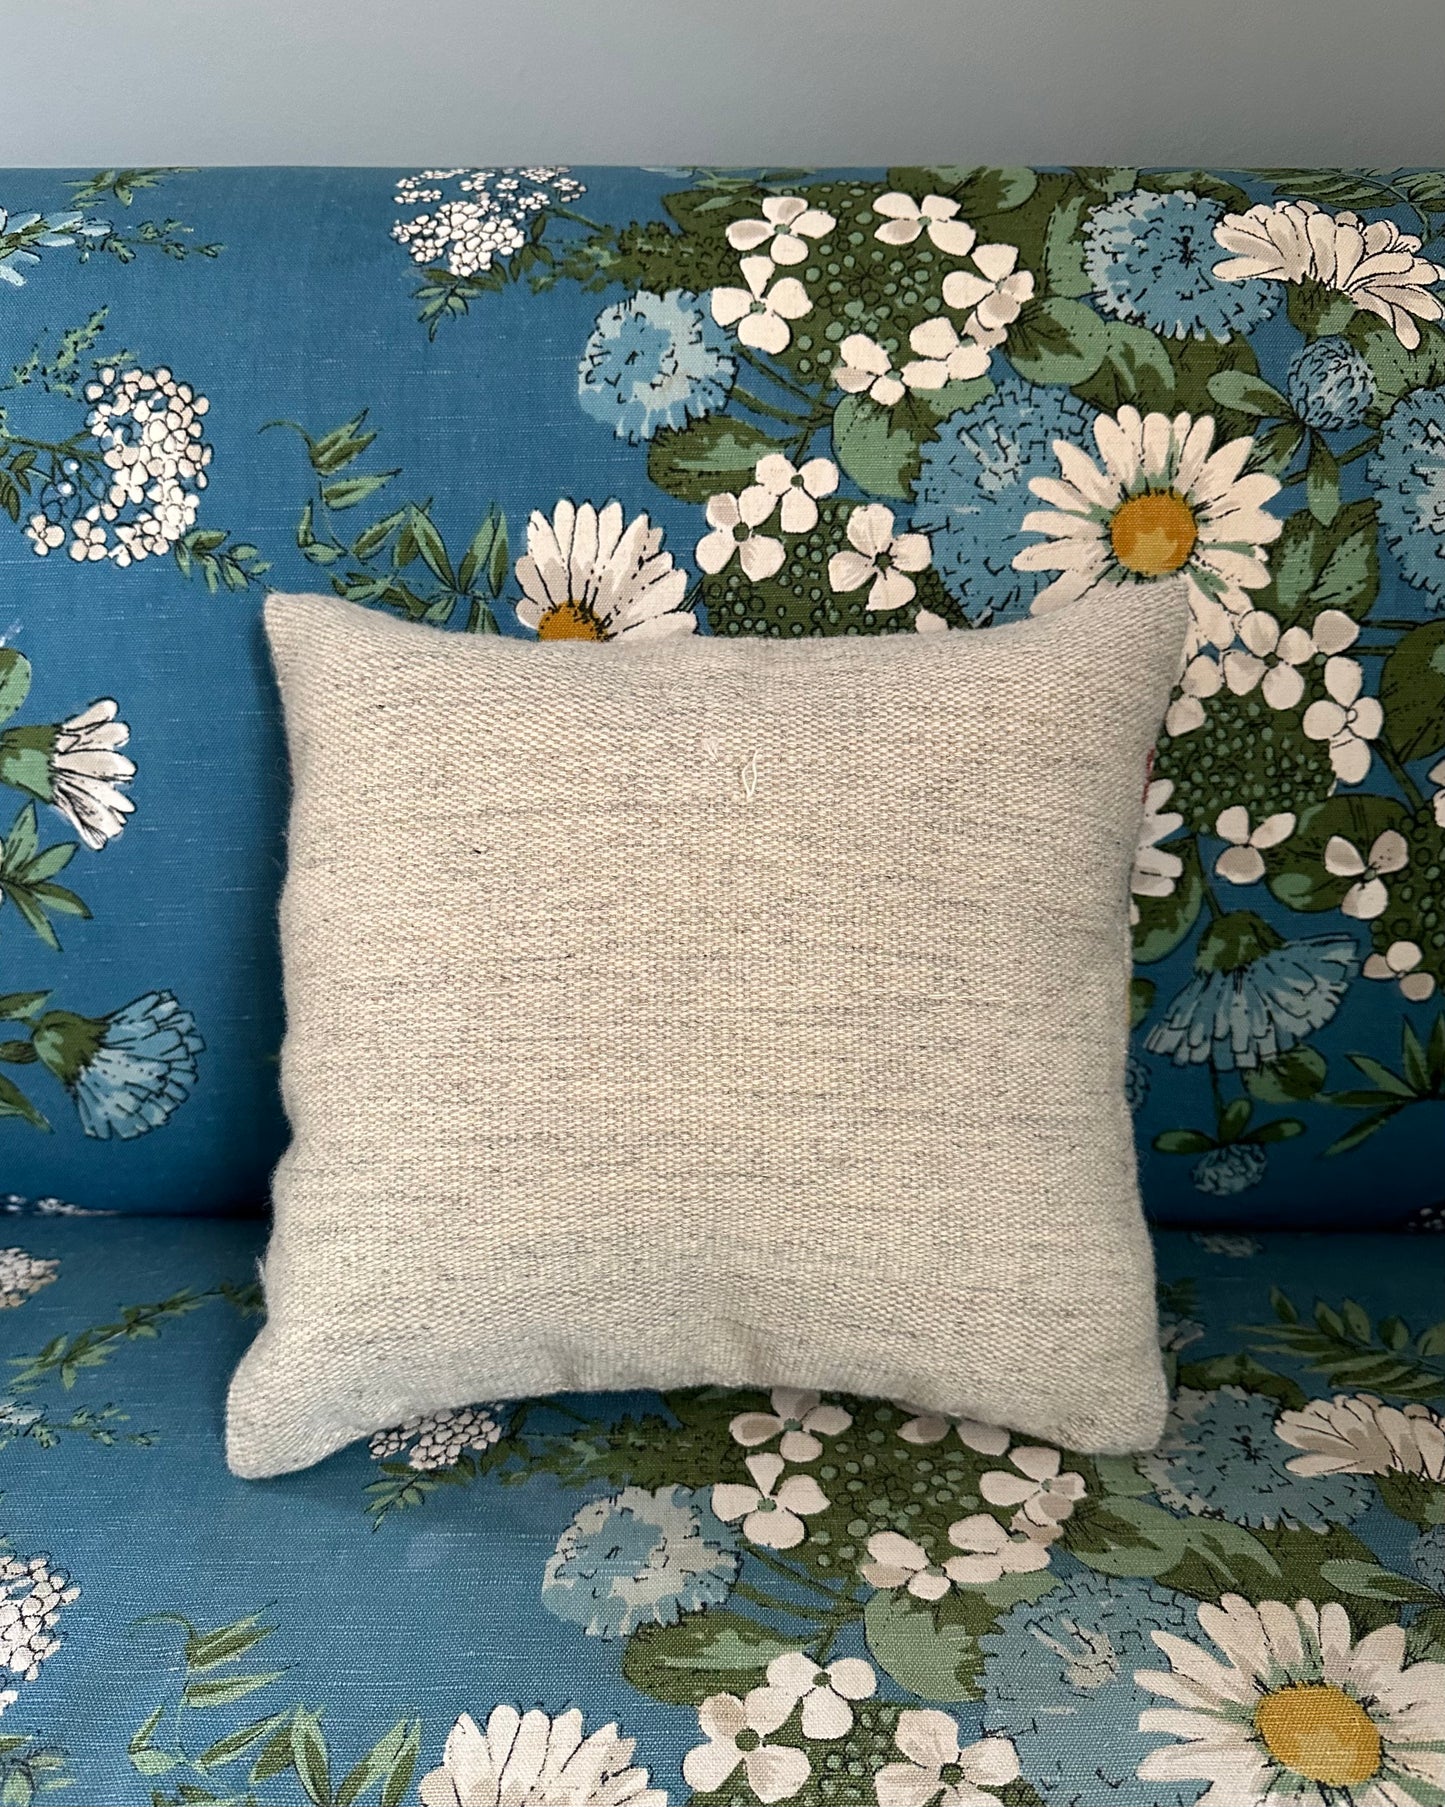 Small Hand-Embroidered Cushion